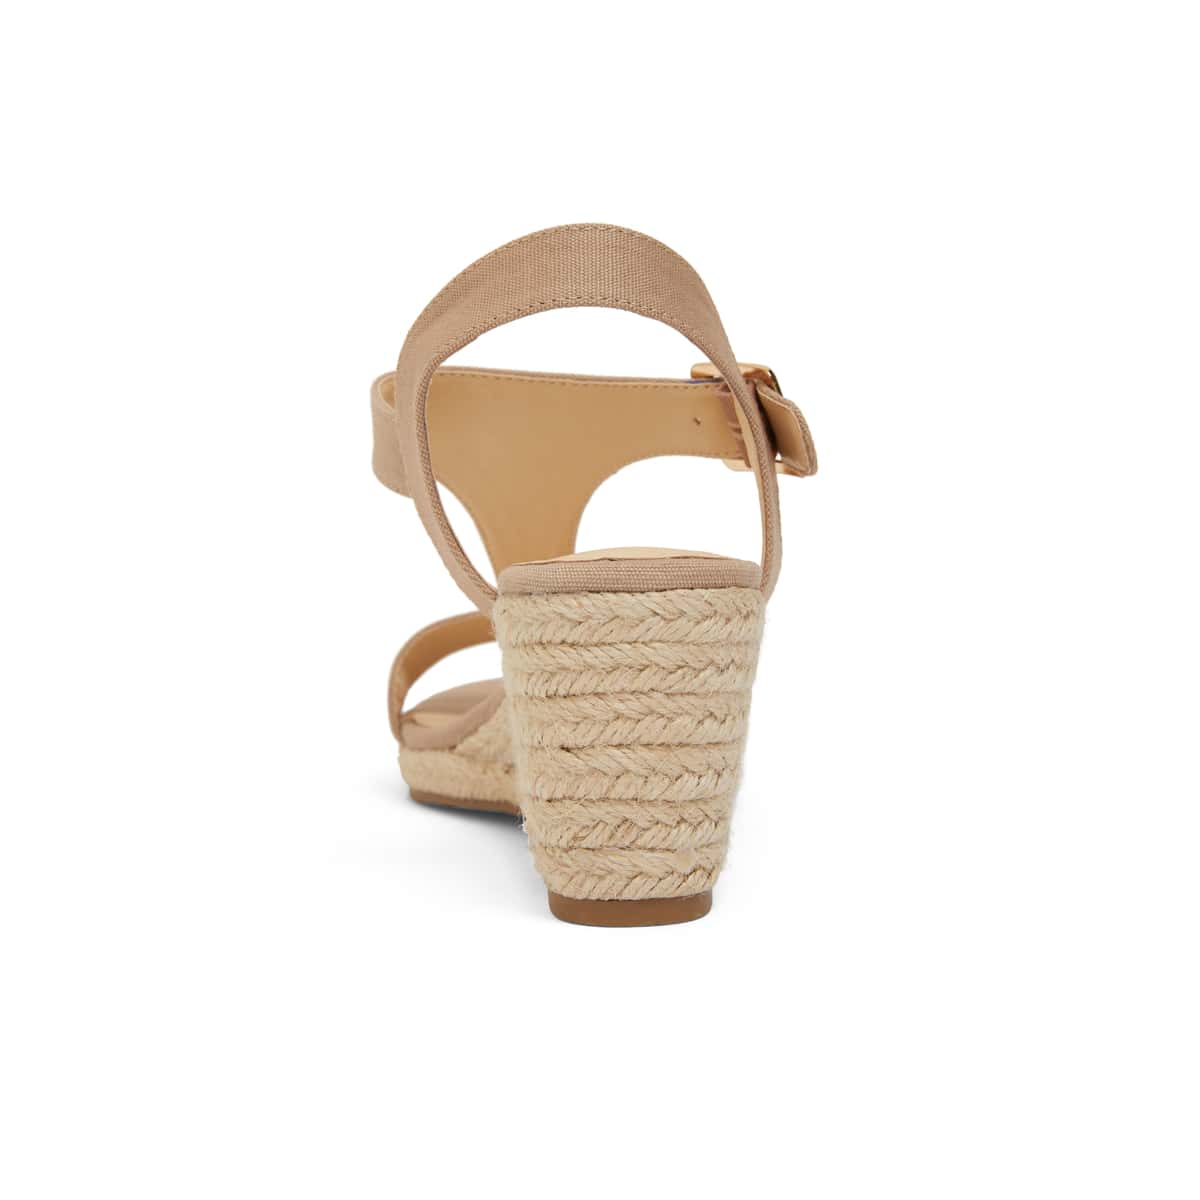 Anchor Espadrille in Taupe Fabric